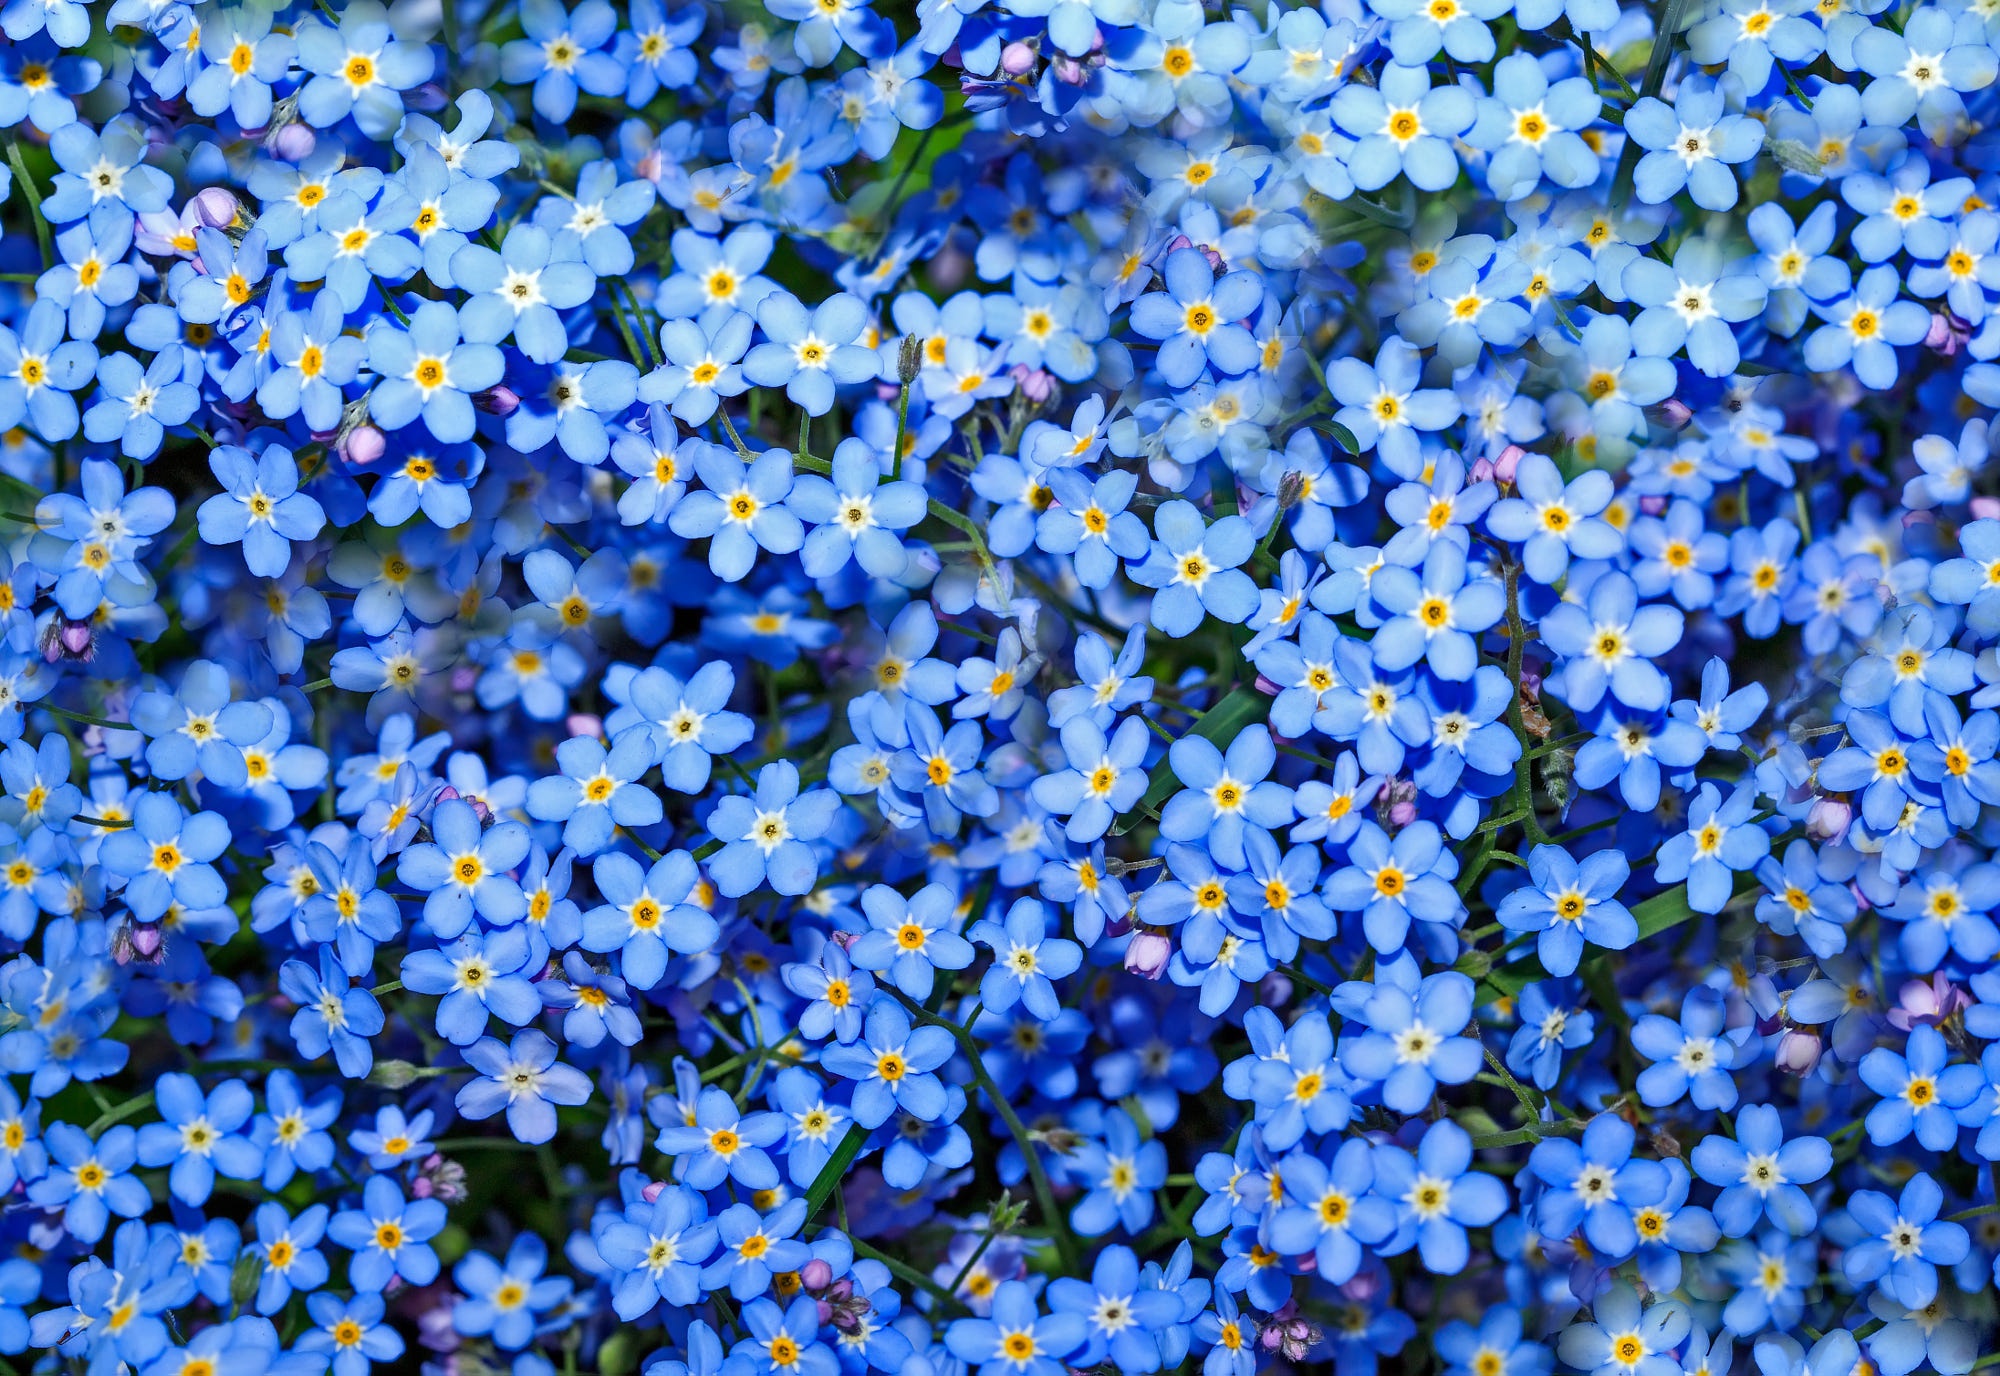 Forget Me Not Wallpaper for Samsung